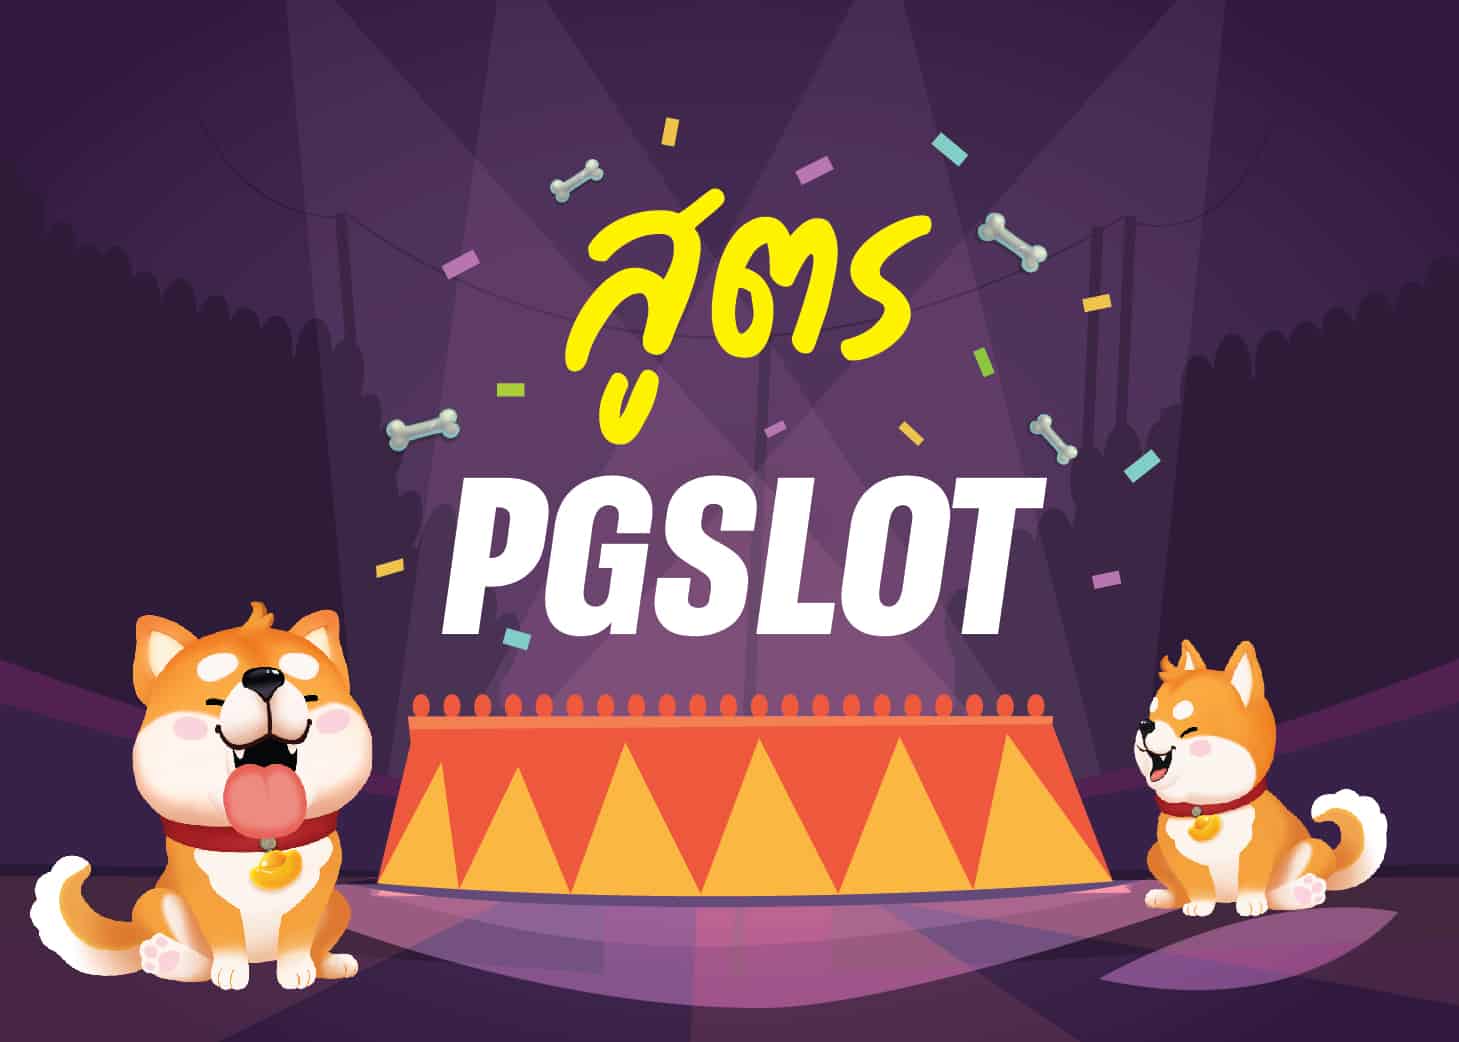 The security of pgslot